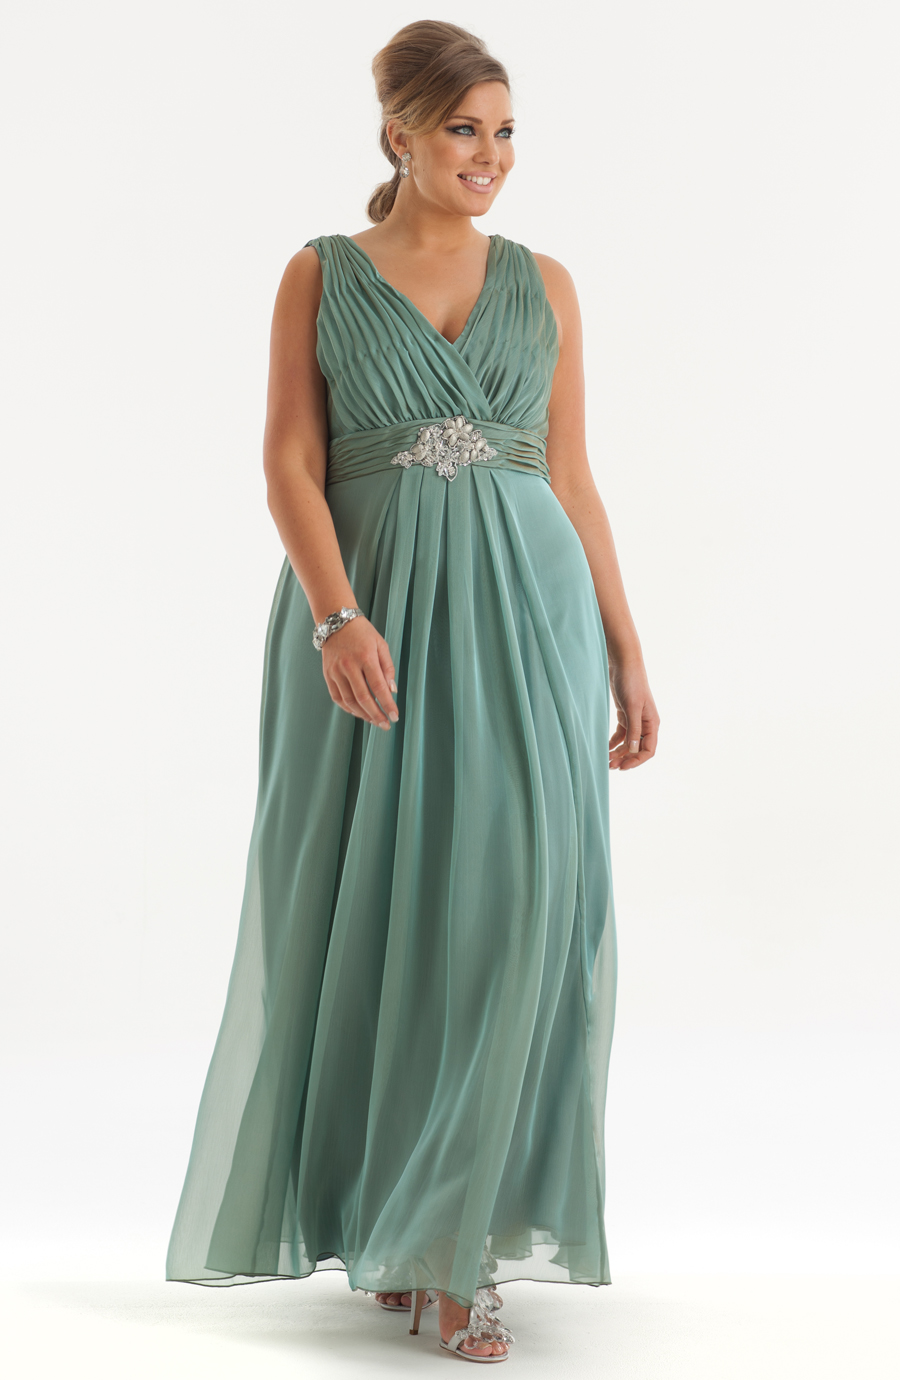 Plus Size Dresses For Night Out : Beautiful And Elegant